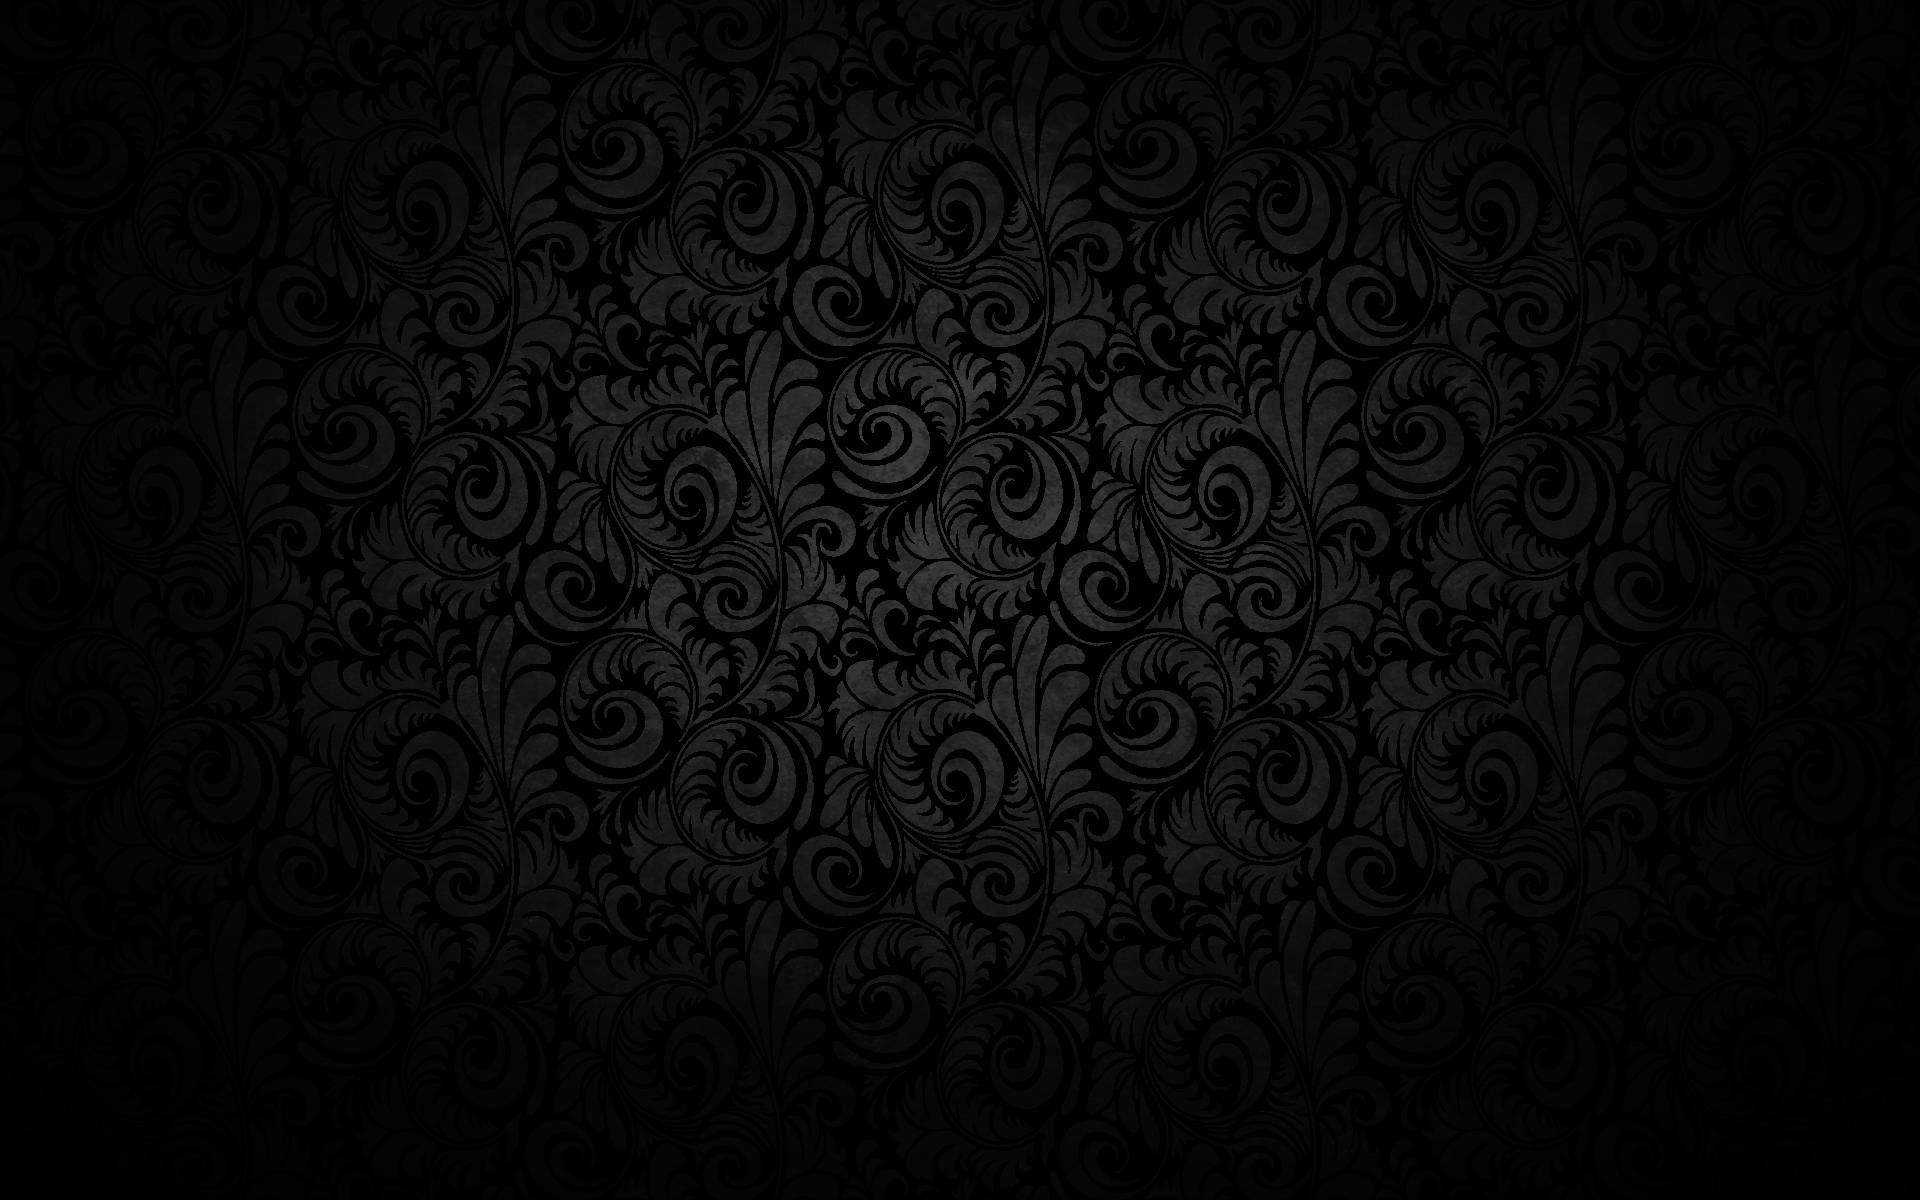 You are viewing a Textures Wallpaper